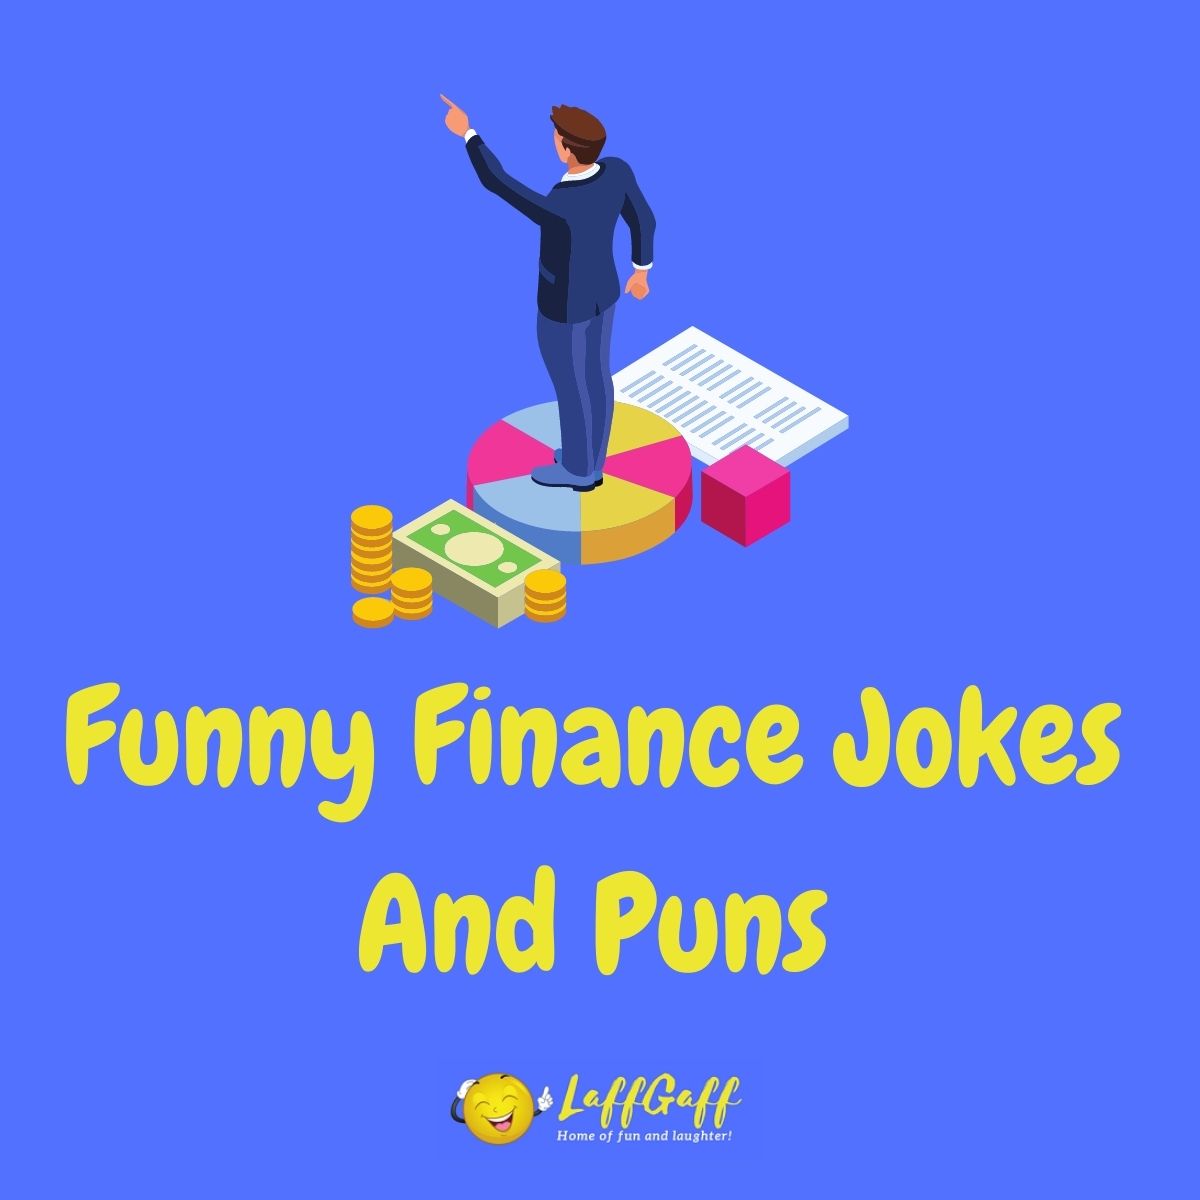 20 Hilarious Finance Jokes And Puns To Keep You Interested!